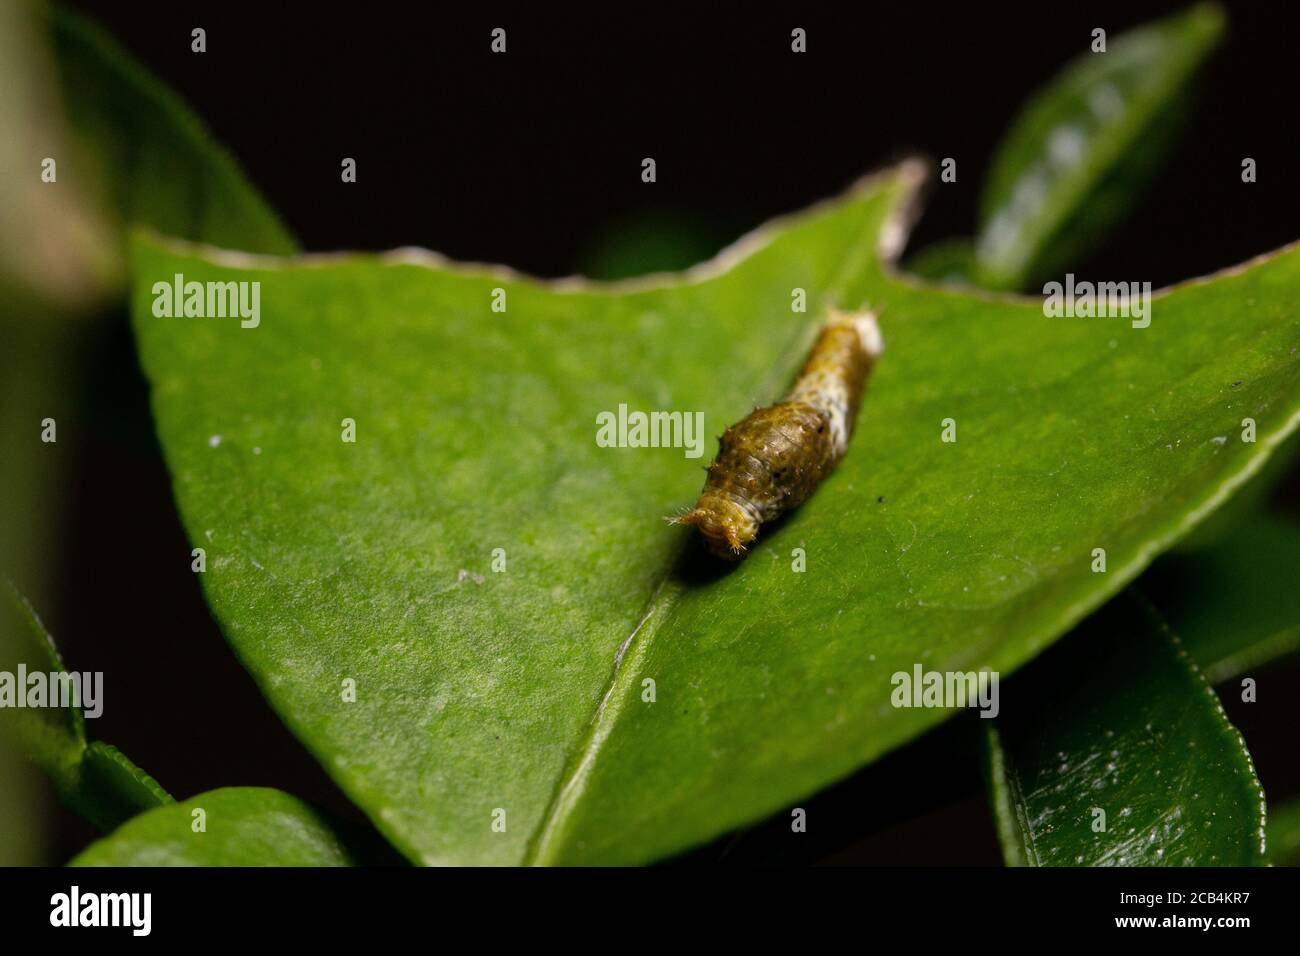 Citrus caterpillar relaxing on leaf also known as lemon tree caterpillar Stock Photo